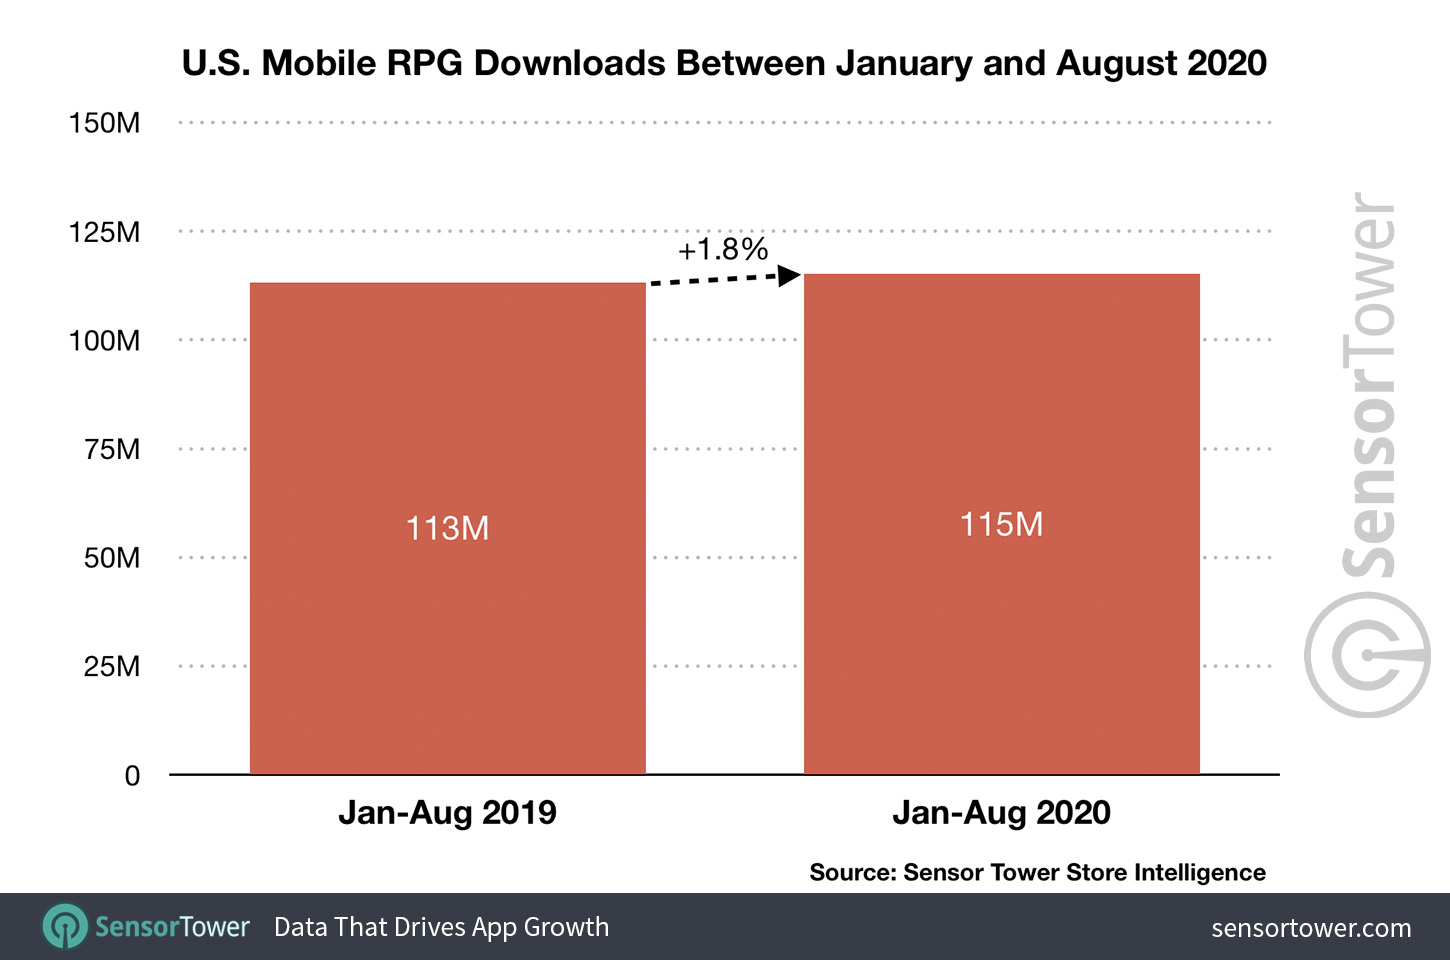 U.S. Mobile RPG Downloads Between January and August 2020